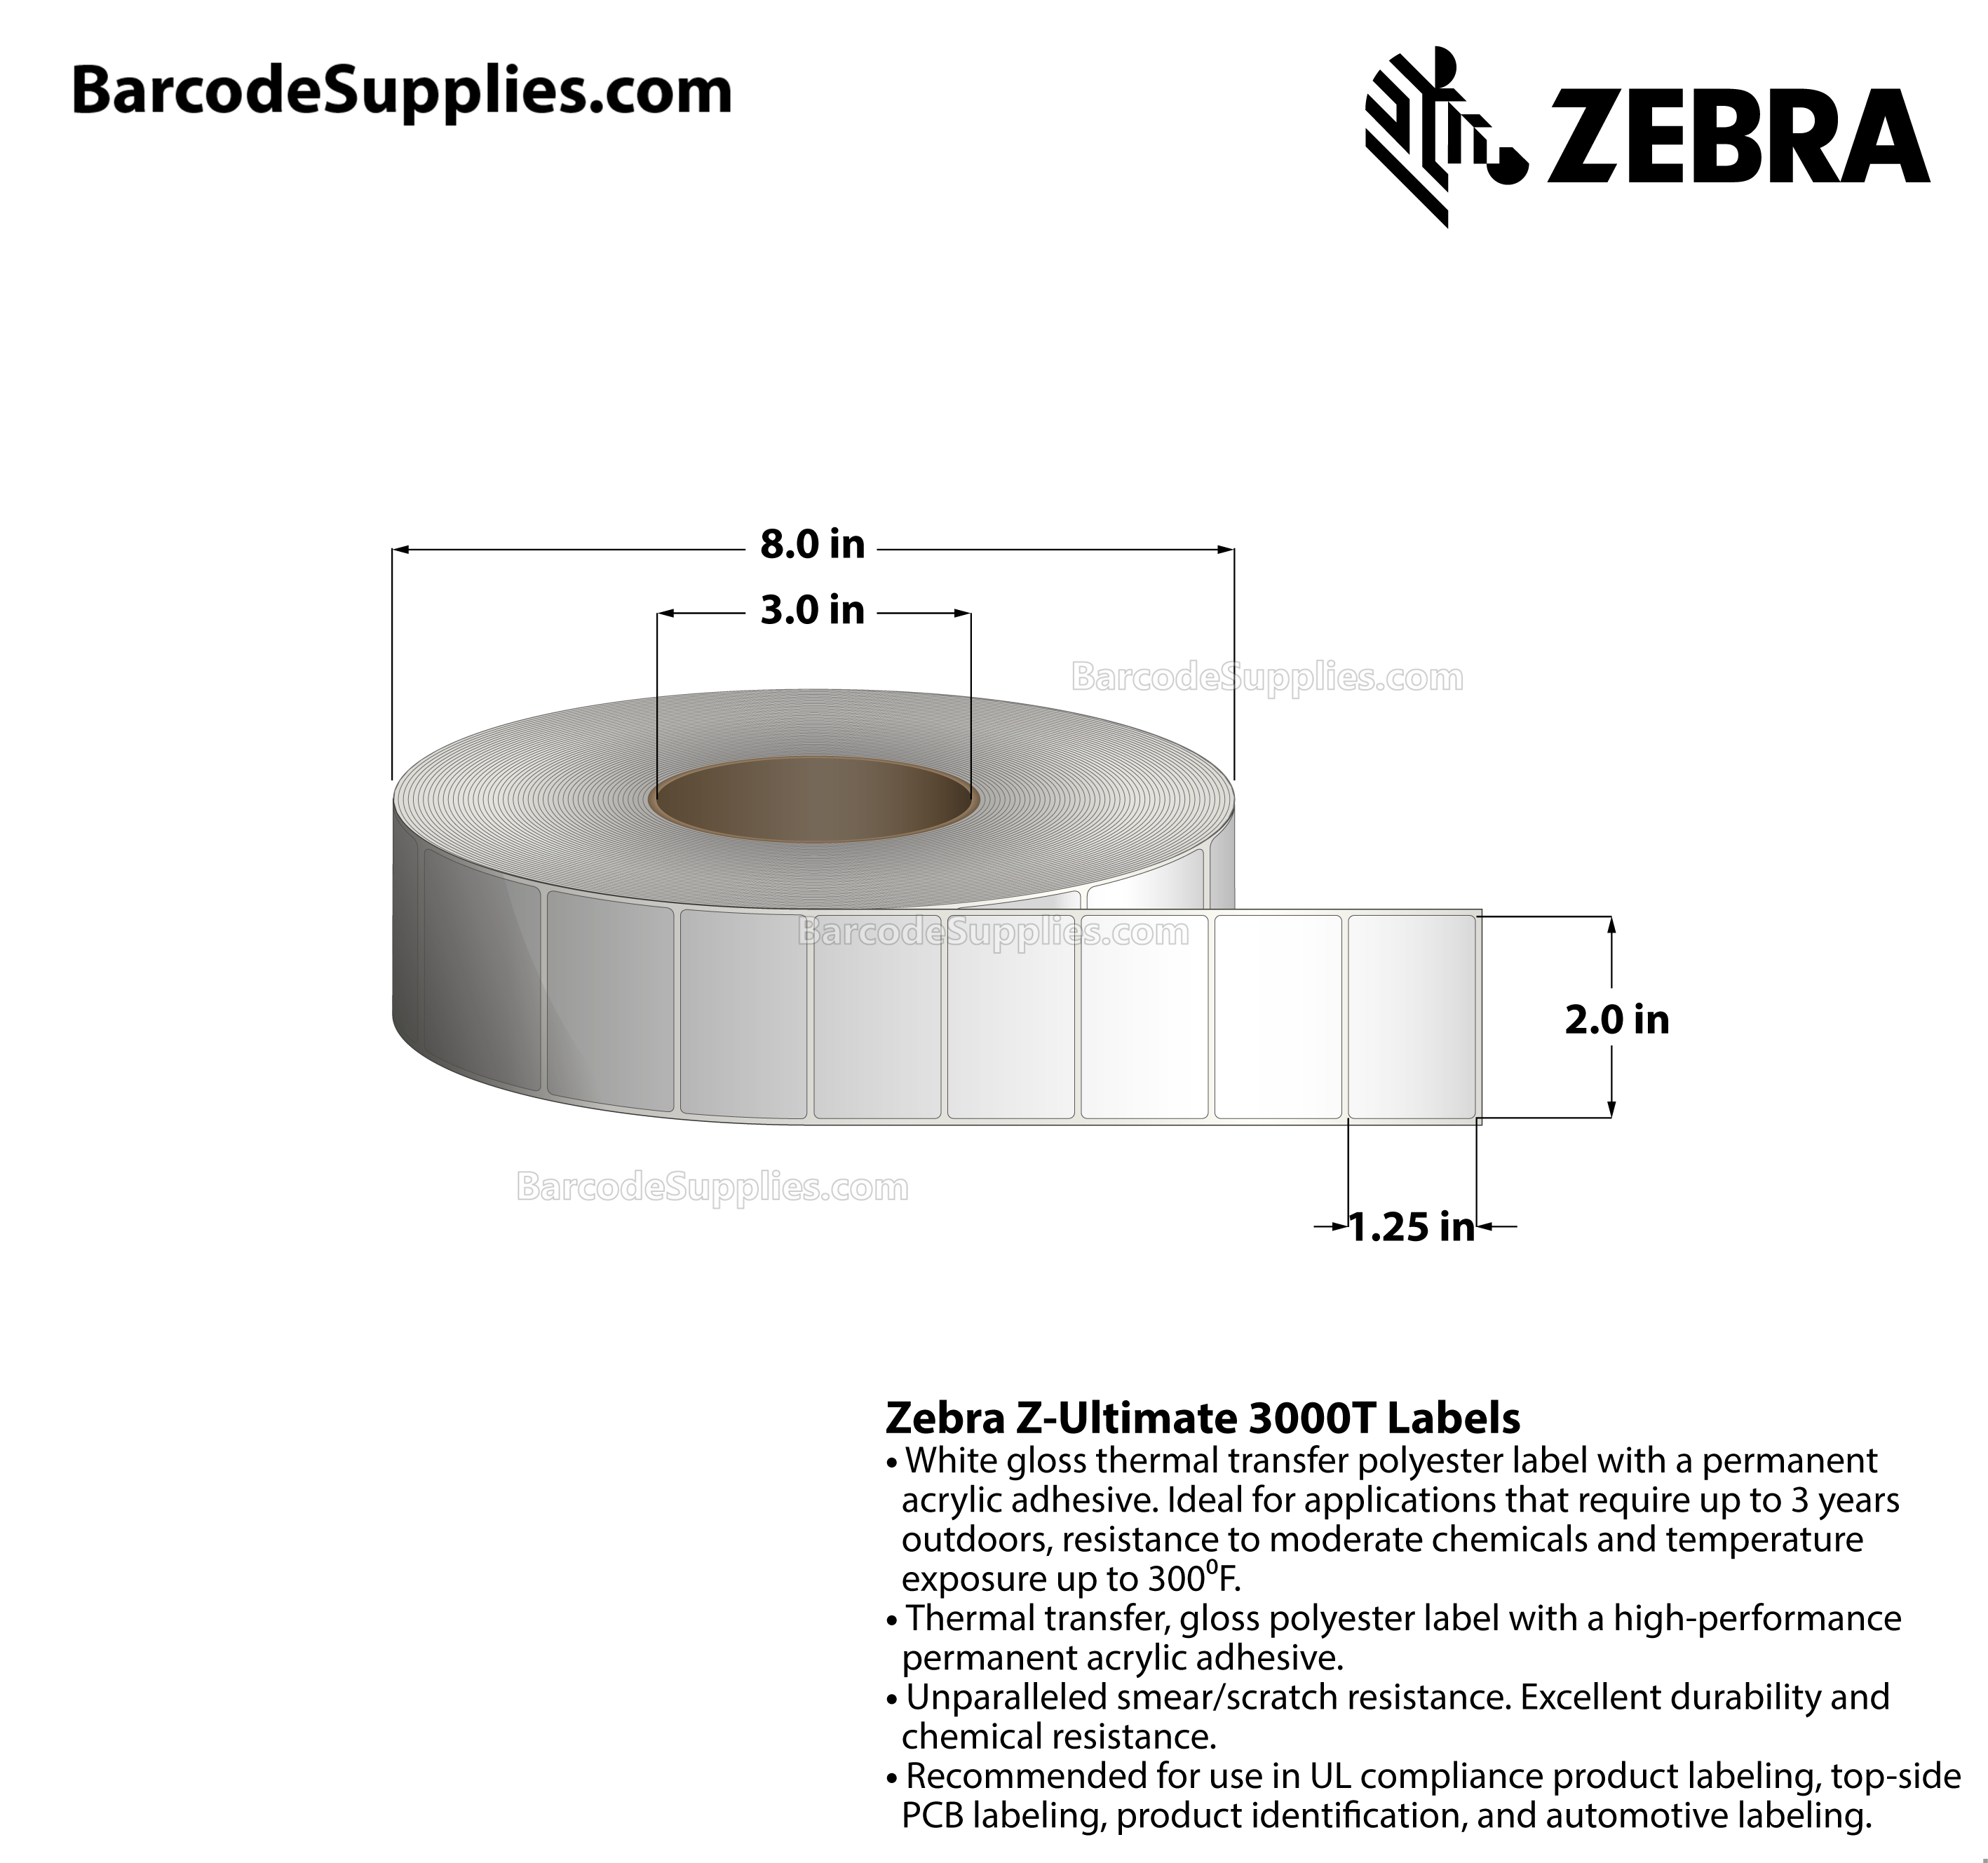 2 x 1.25 Thermal Transfer White Z-Ultimate 3000T Labels With Permanent Adhesive - Not Perforated - 4270 Labels Per Roll - Carton Of 4 Rolls - 17080 Labels Total - MPN: 10011698